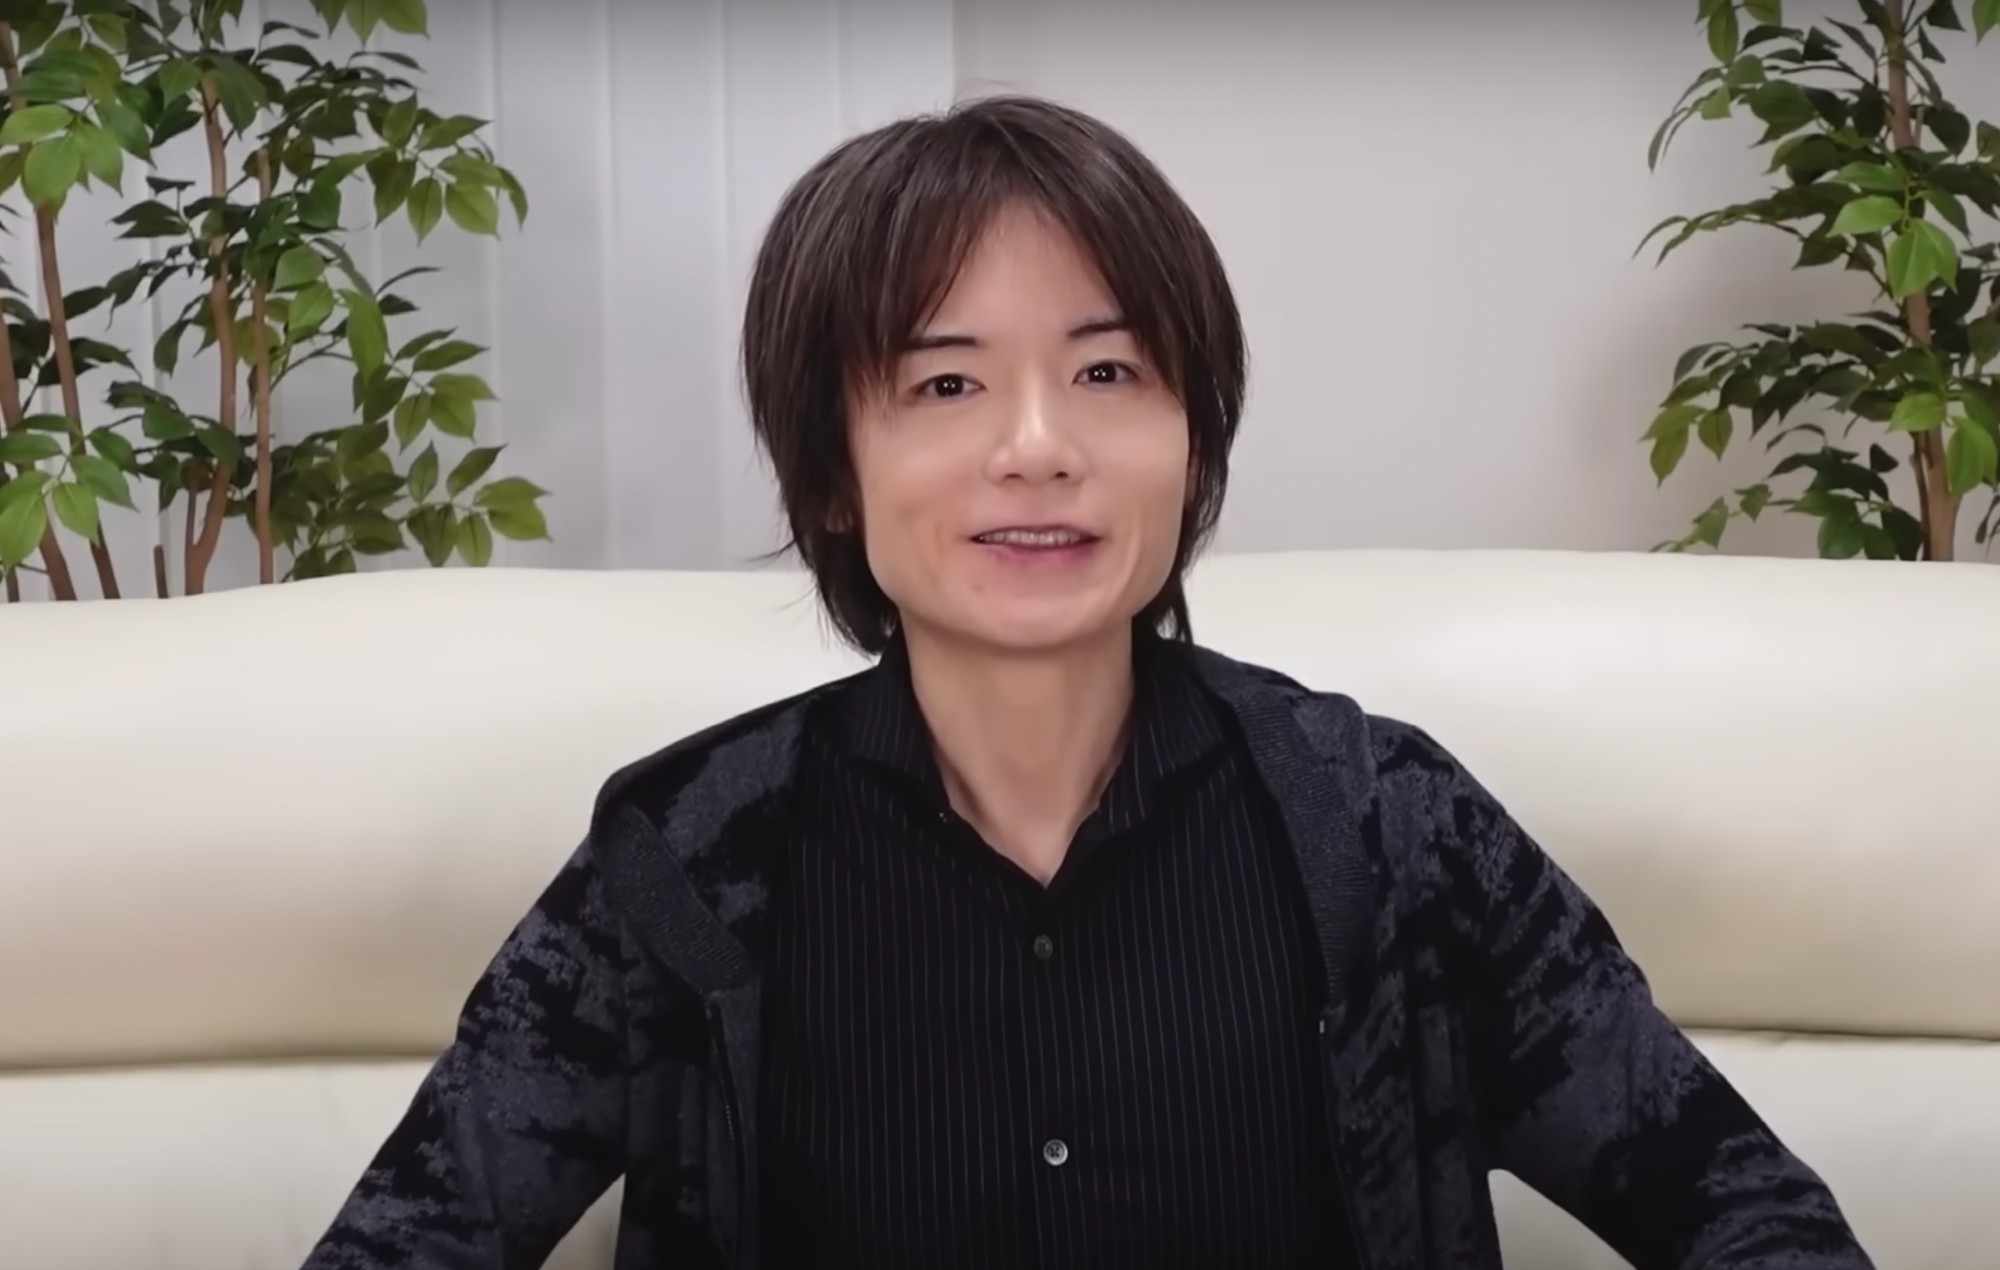 All ‘Smash Bros.’ fighters have an equal chance of winning, creator Sakurai reveals